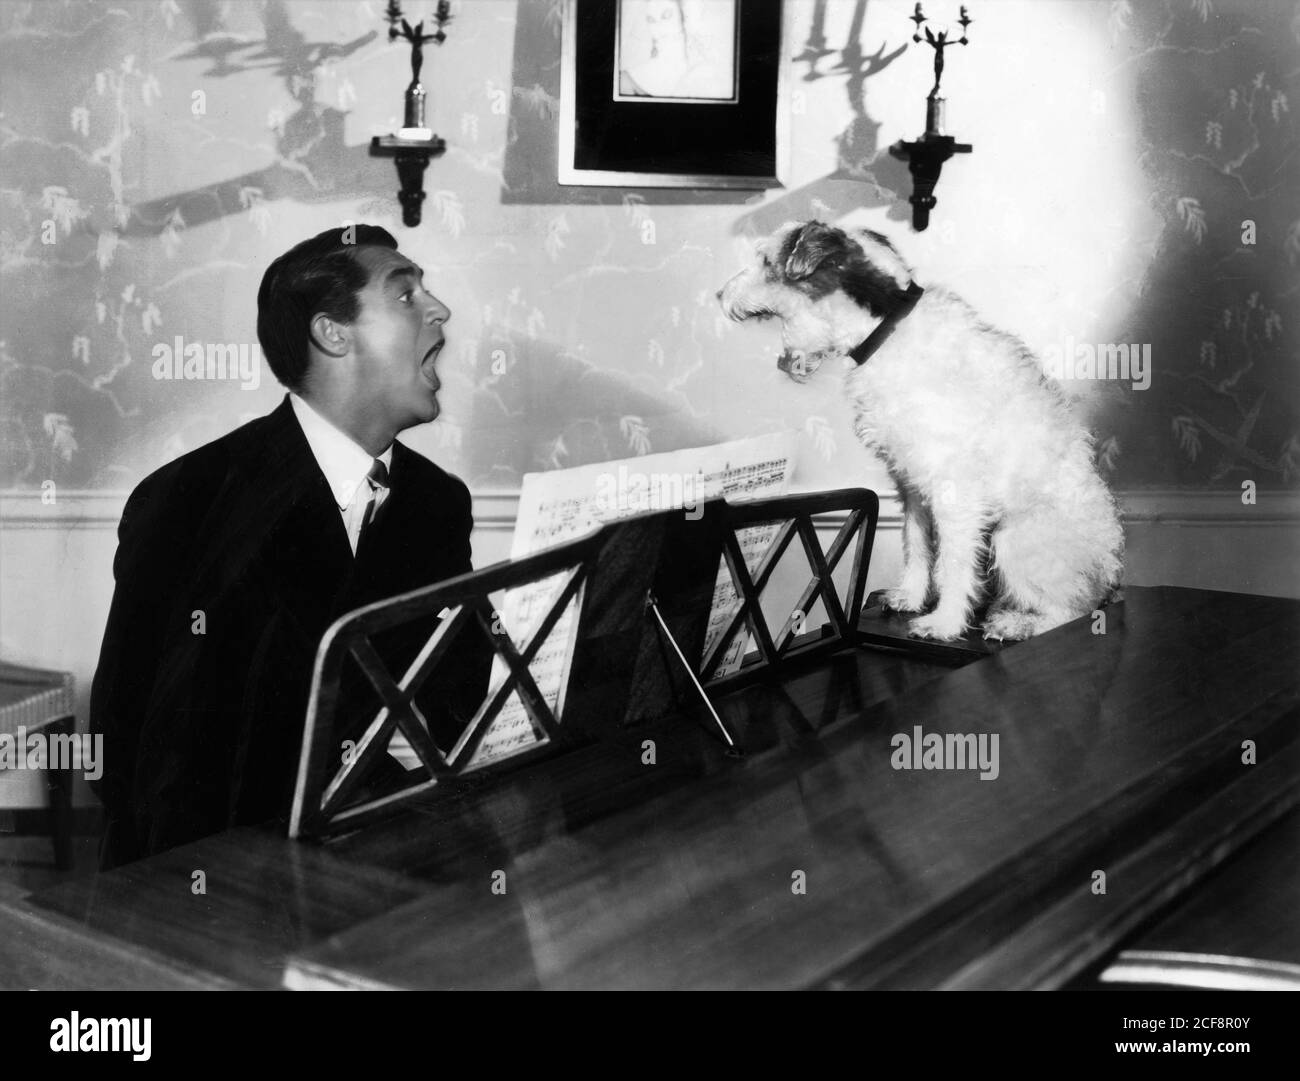 CARY GRANT and wire haired terrier dog SKIPPY as ASTA as Mr. Smith in THE AWFUL TRUTH 1937 director LEO McCAREY based on play by Arthur Richman screenplay Vina Delmar Columbia Pictures Stock Photo